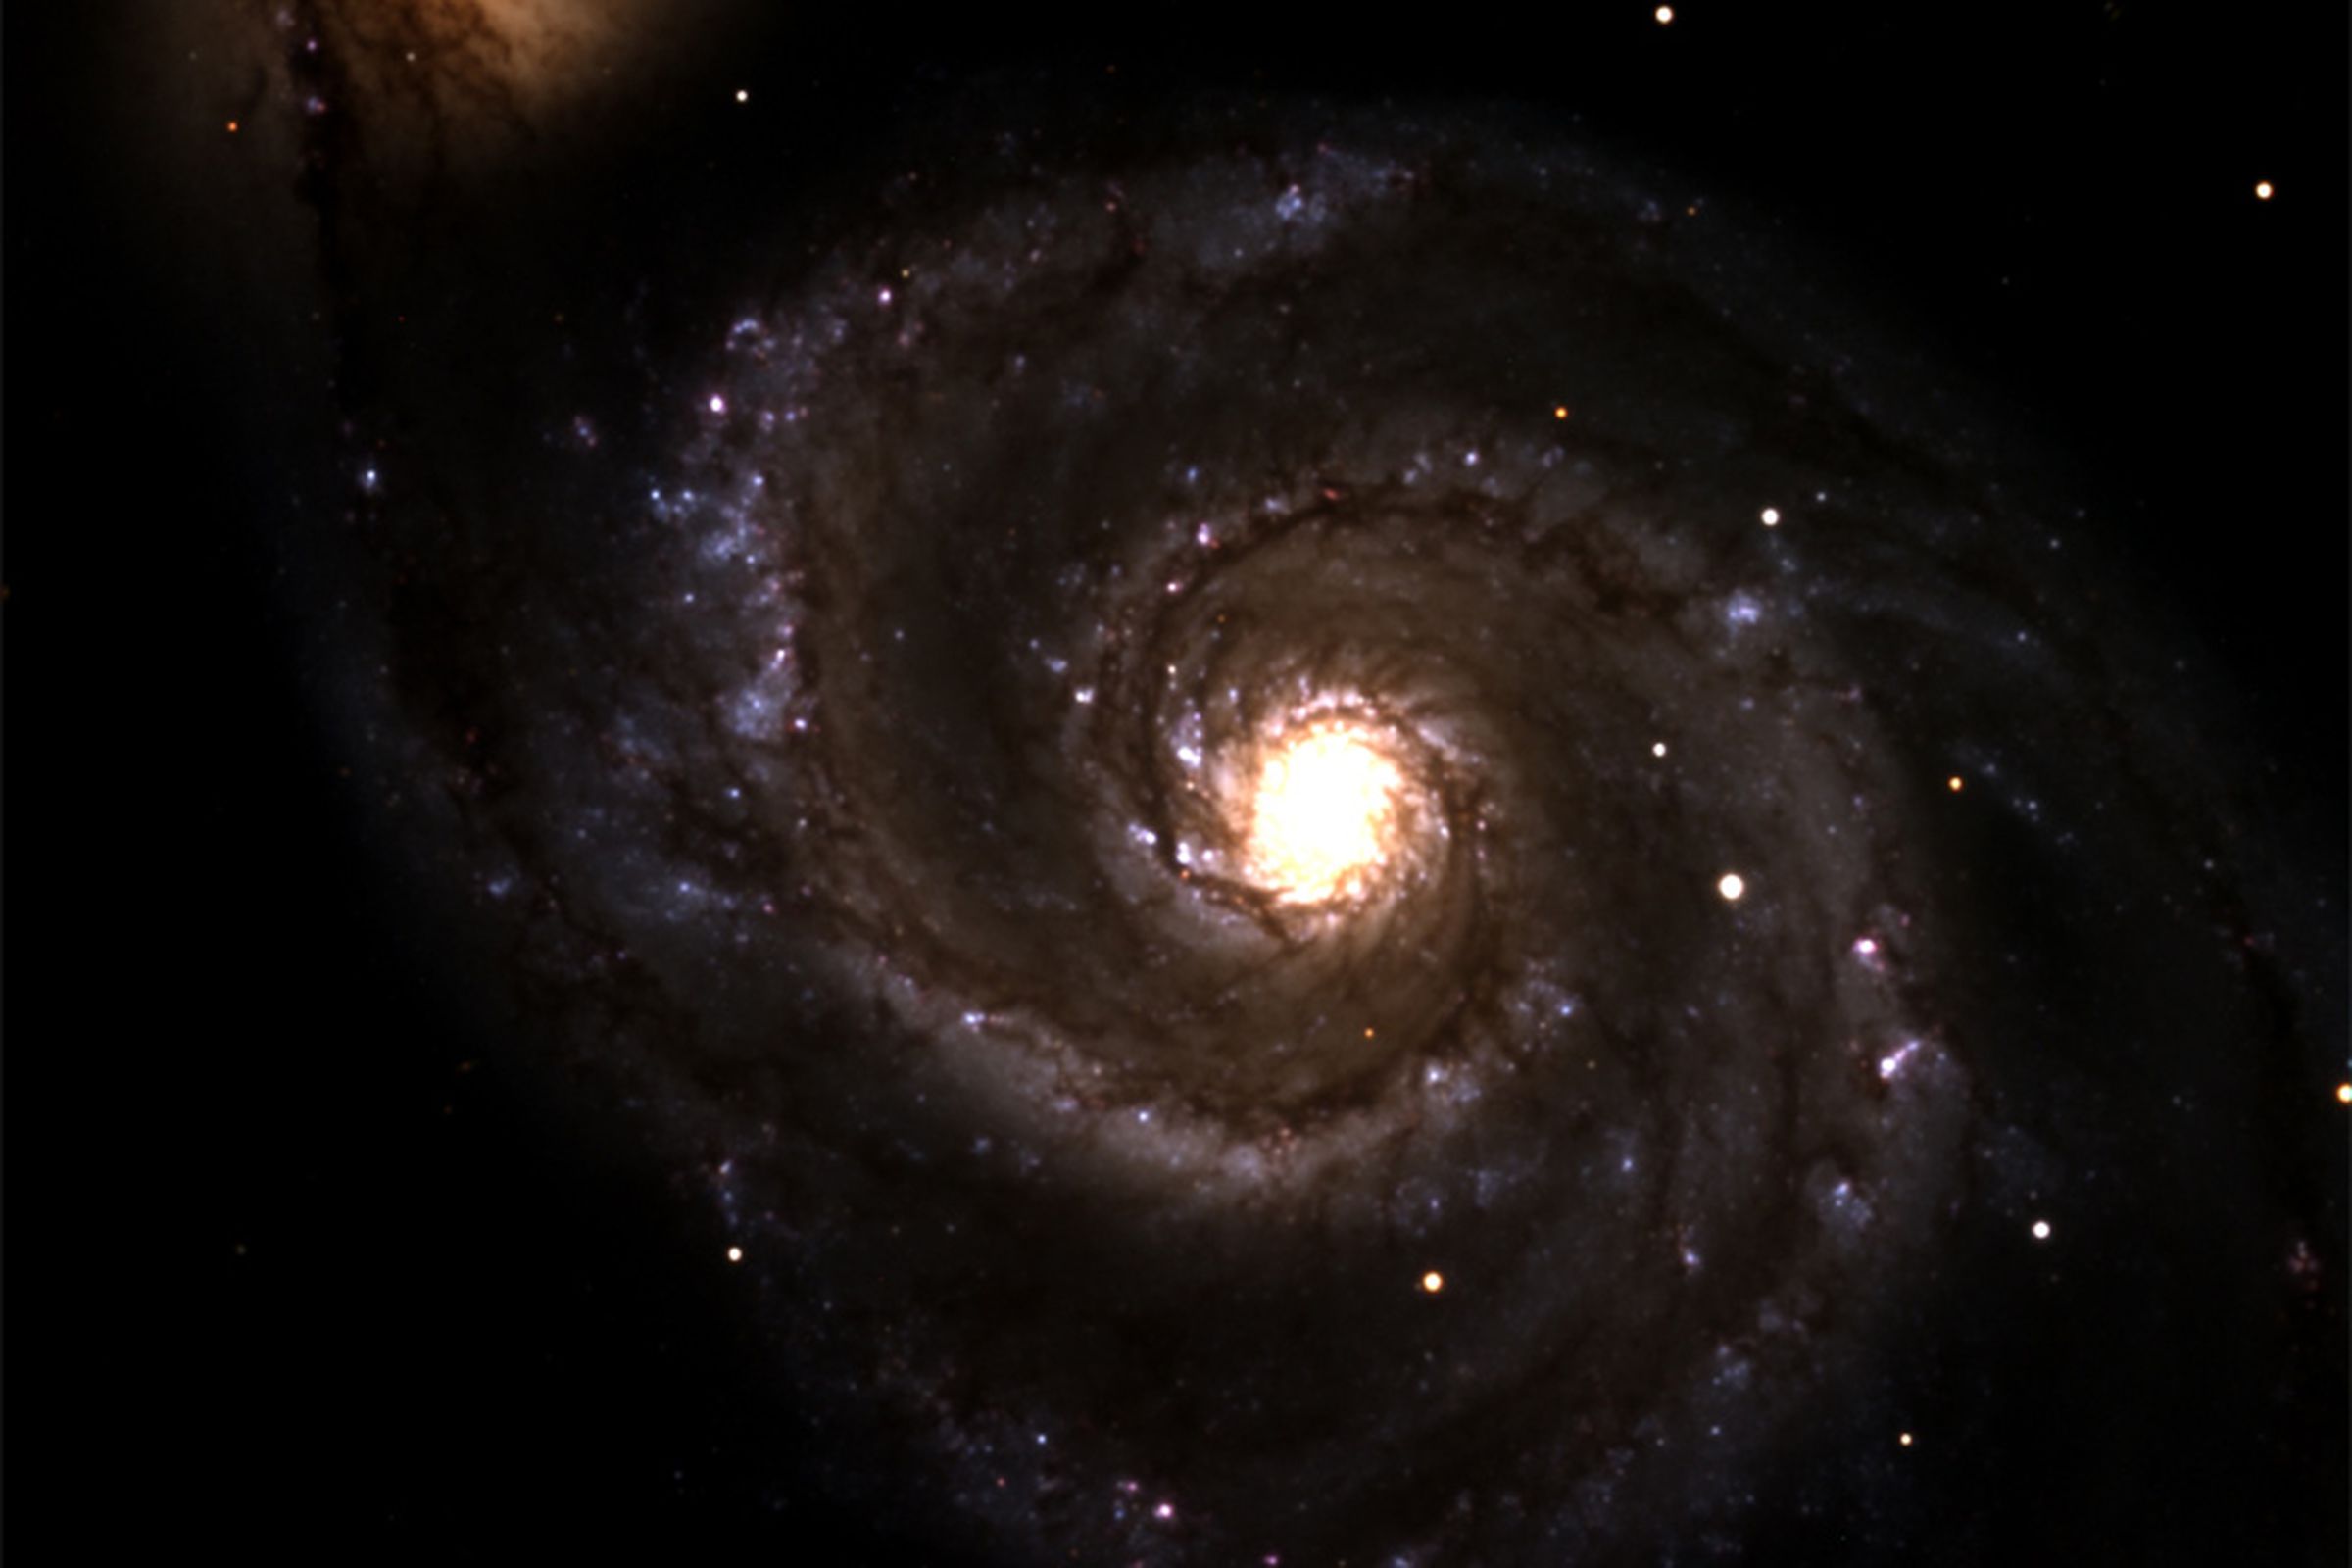 whirlpool galaxy (discovery channel telescope)